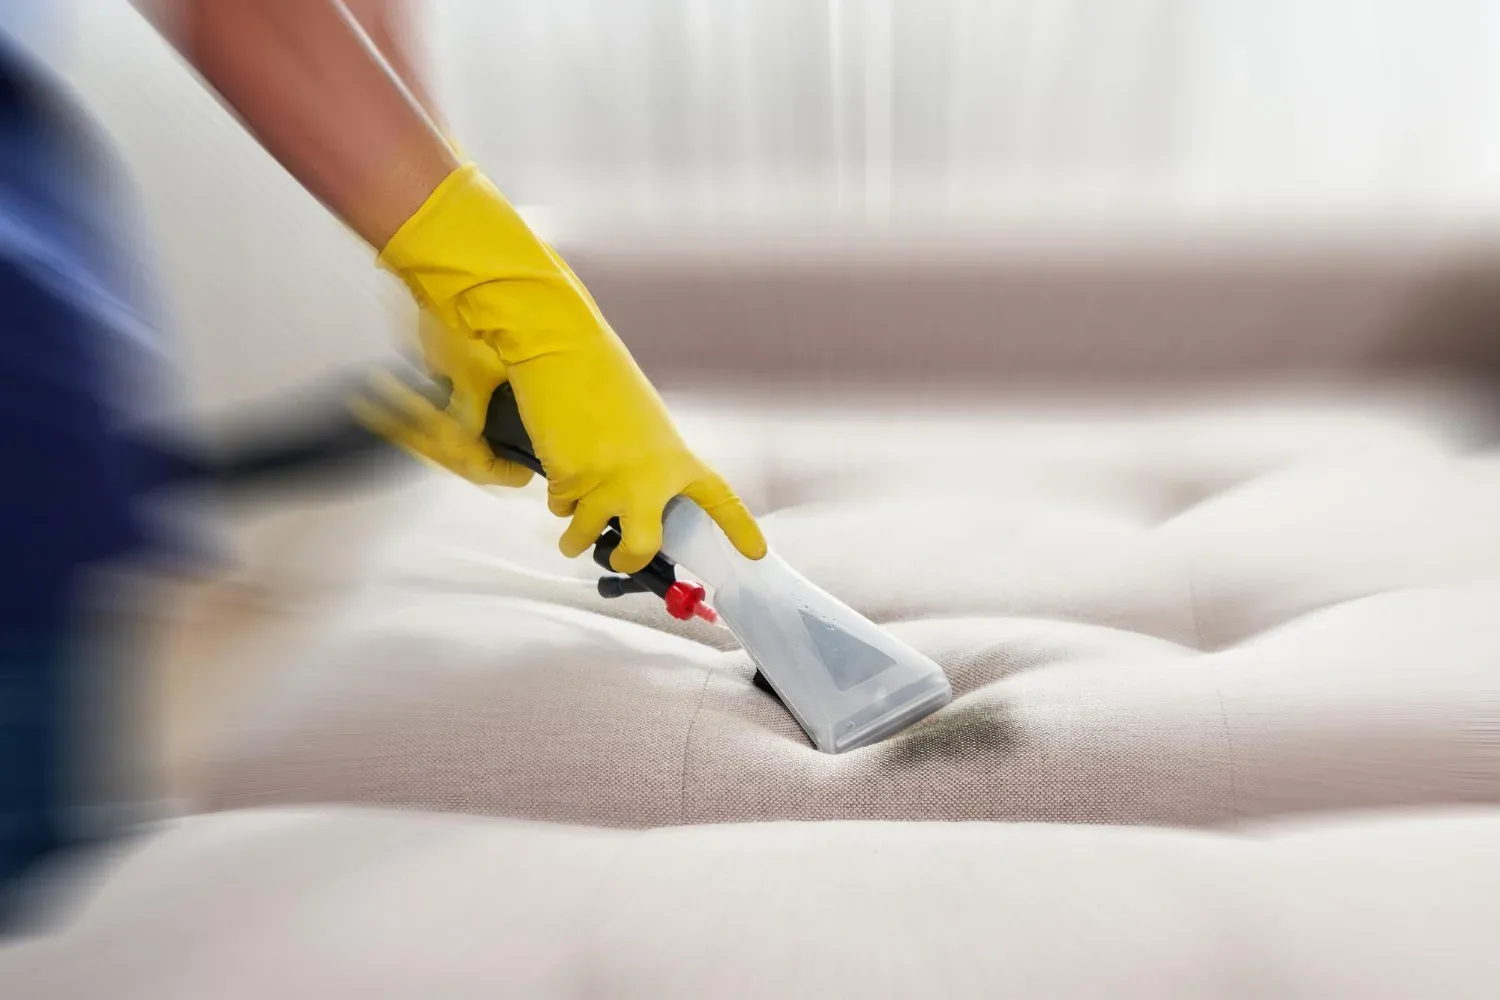 Professional Mattress Cleaning in Abbotsford, BC